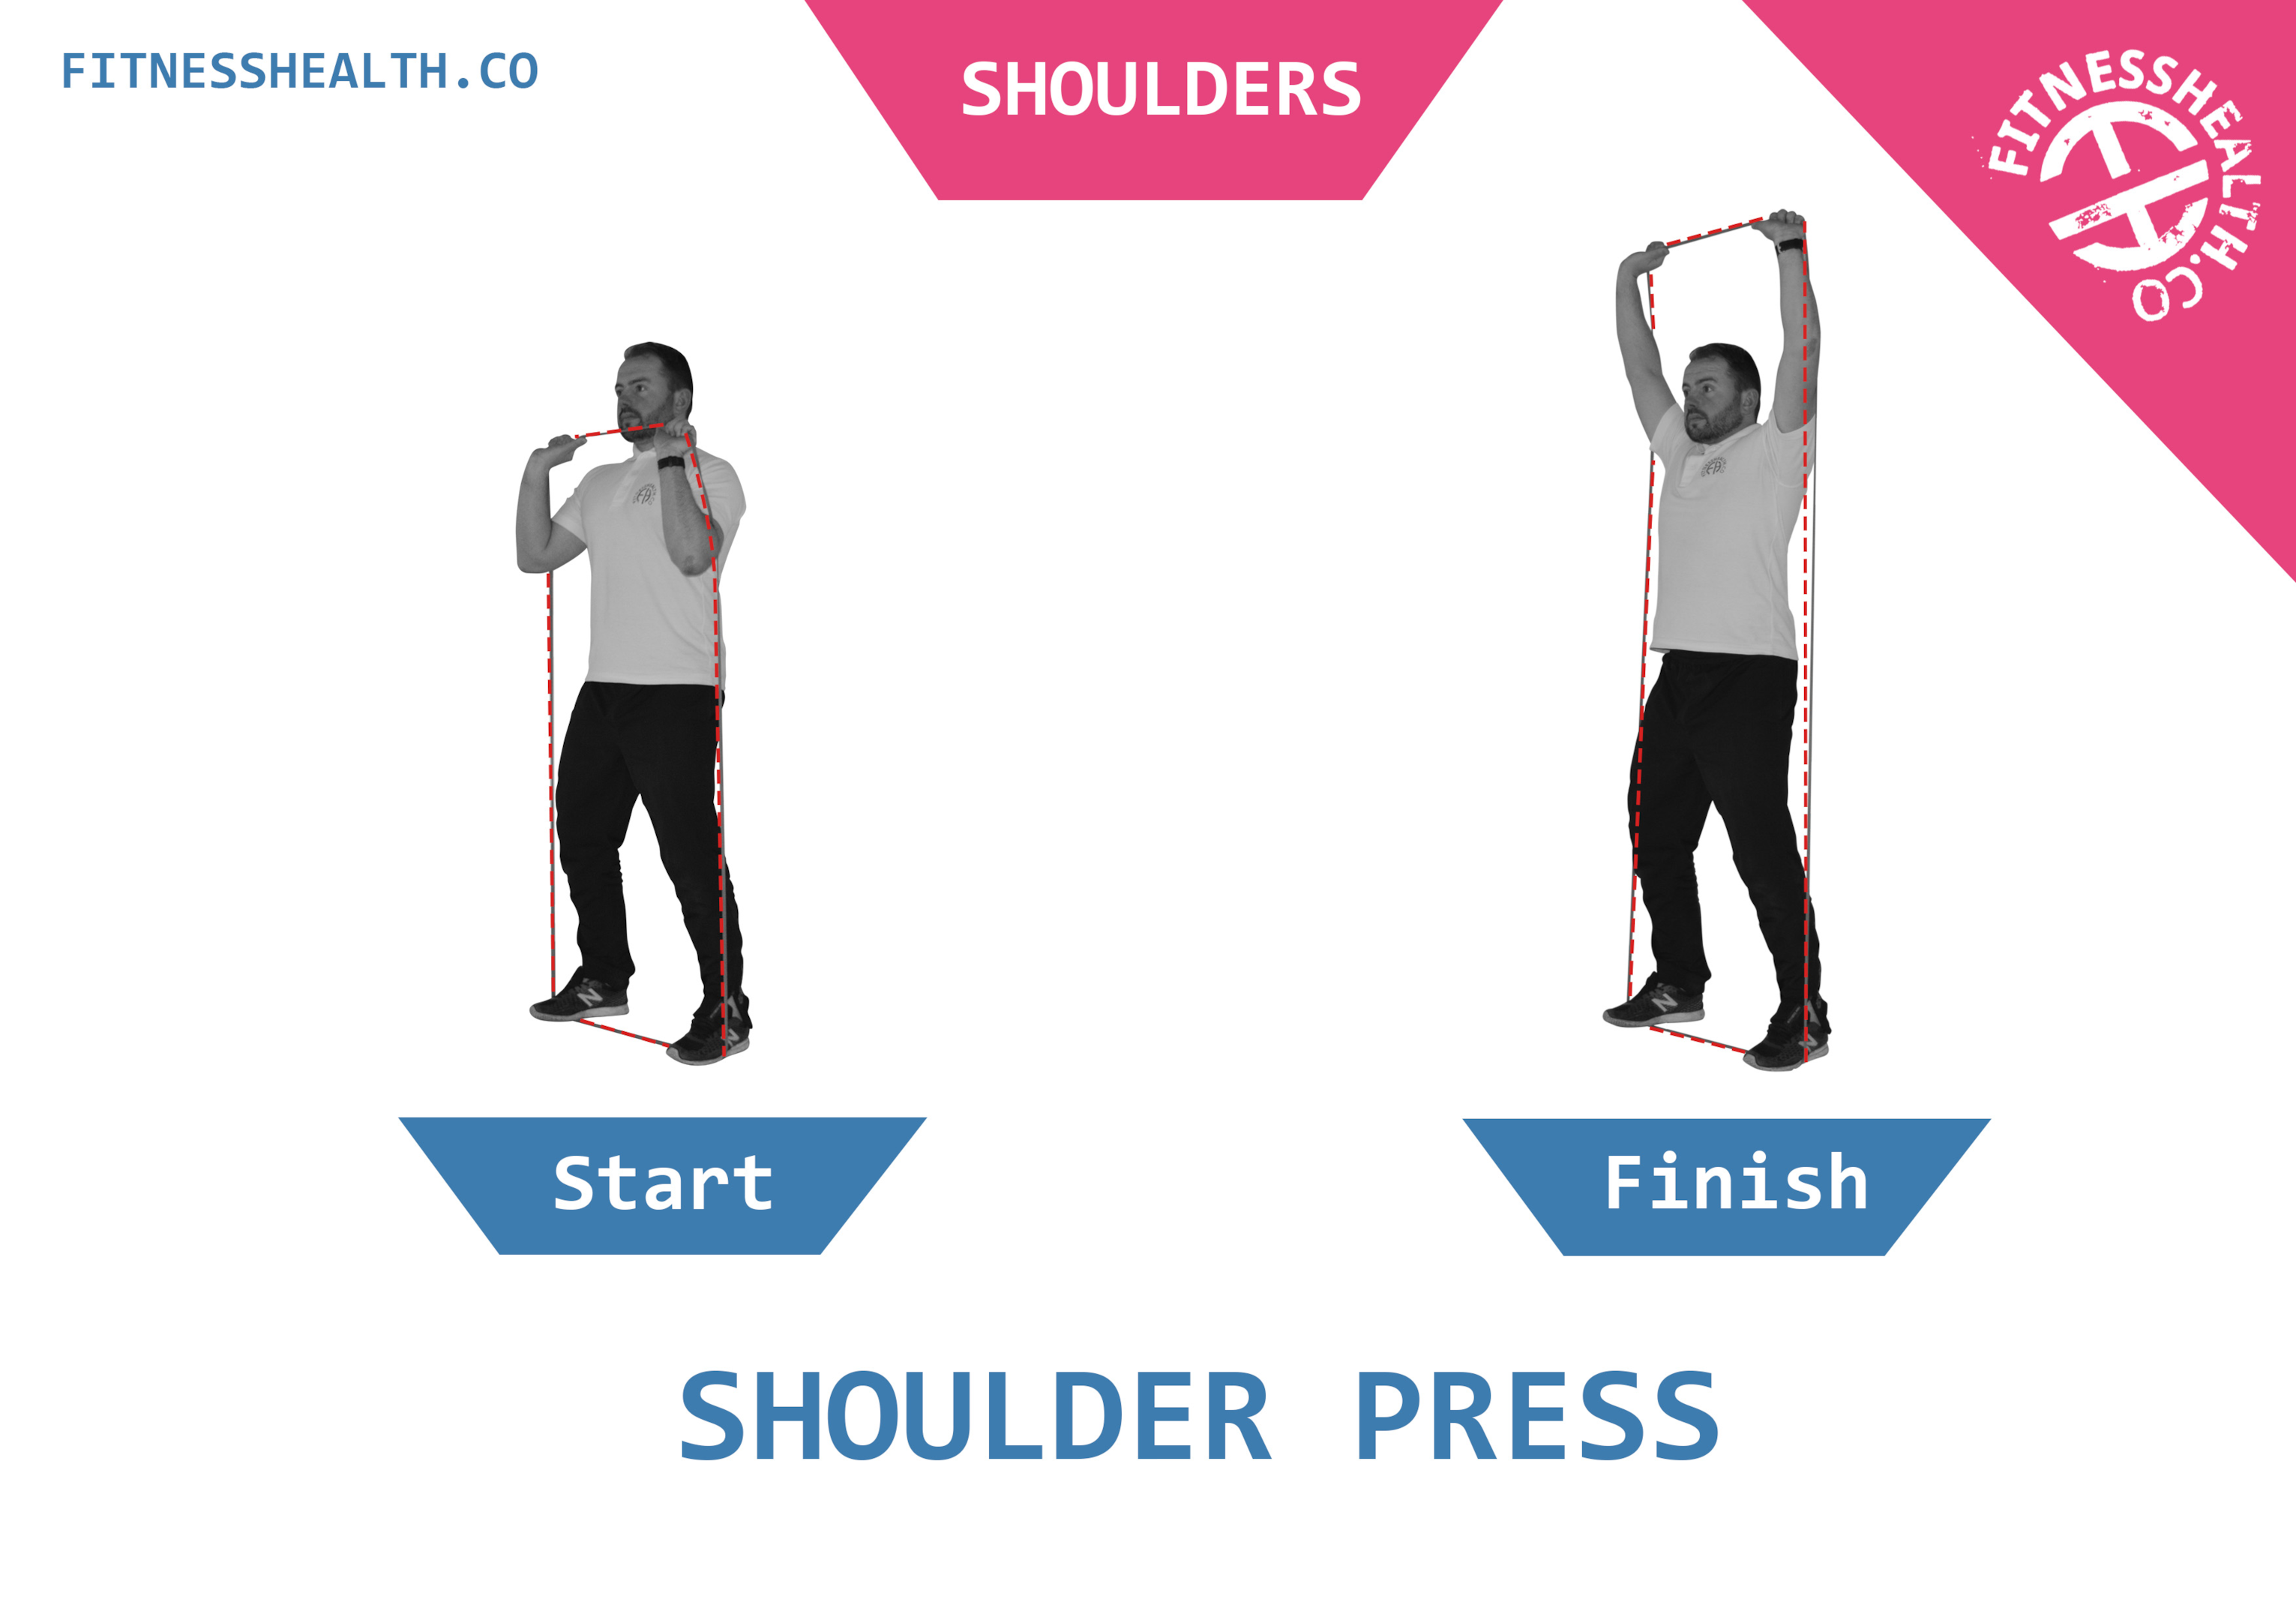 around The The World Shoulder Exercise